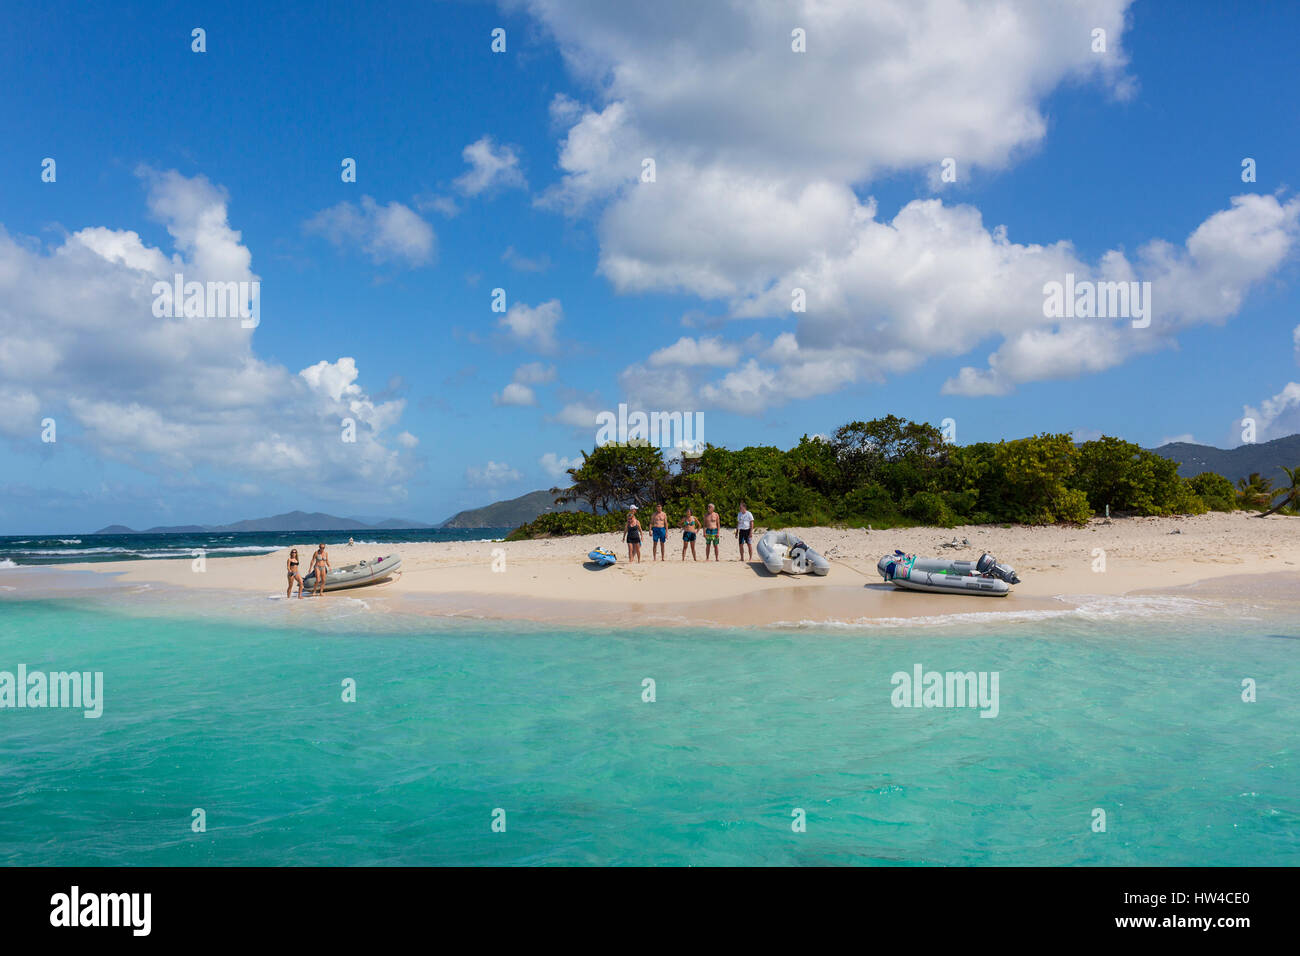 Tourists standing on tropical beach Stock Photo